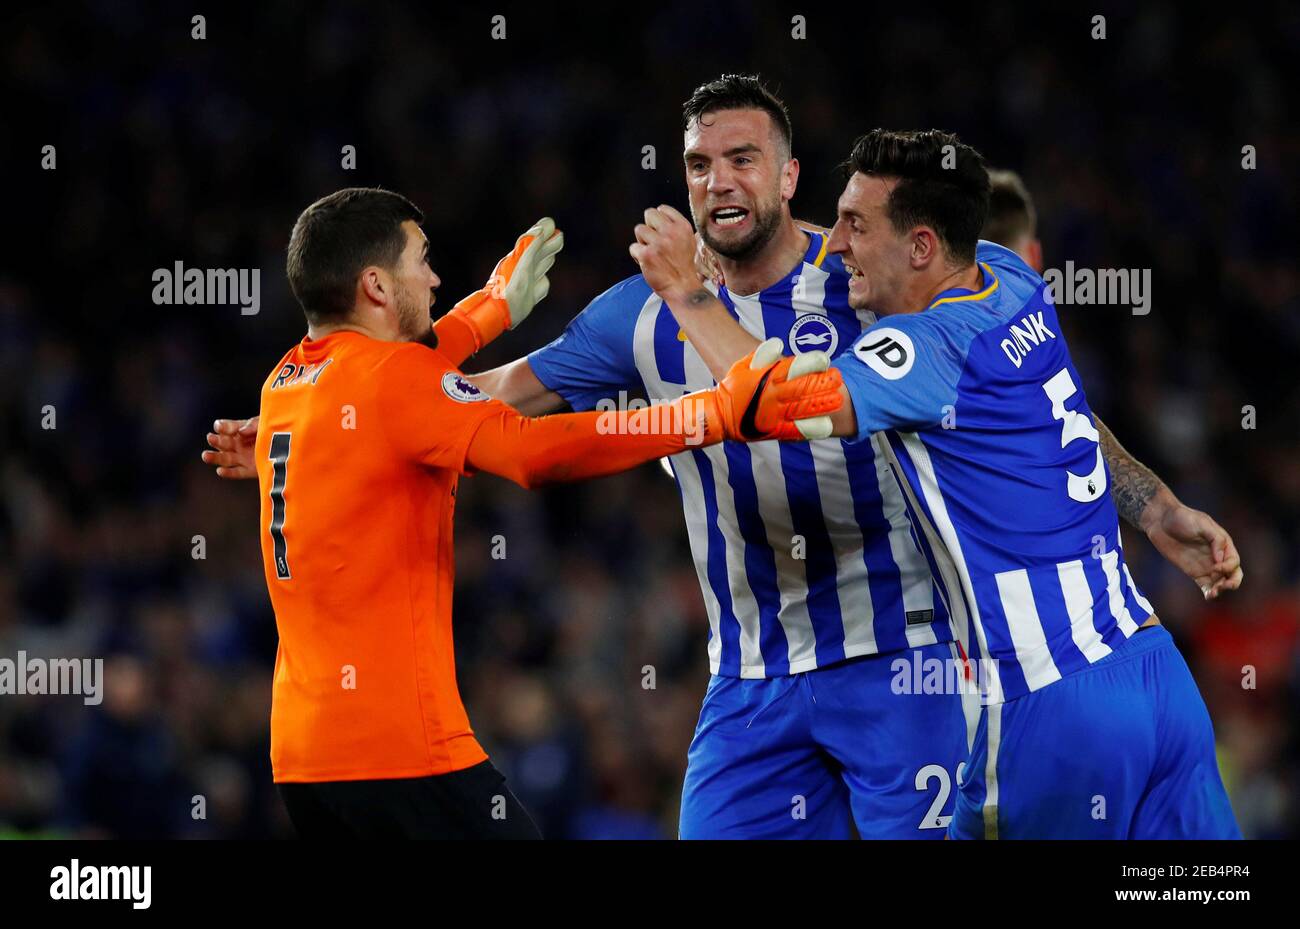 Soccer Football - Premier League - Brighton & Hove Albion v Manchester United - The American Express Community Stadium, Brighton, Britain - May 4, 2018   Brighton's Shane Duffy celebrates after the match with Lewis Dunk and Mathew Ryan   REUTERS/Eddie Keogh    EDITORIAL USE ONLY. No use with unauthorized audio, video, data, fixture lists, club/league logos or 'live' services. Online in-match use limited to 75 images, no video emulation. No use in betting, games or single club/league/player publications.  Please contact your account representative for further details. Stock Photo